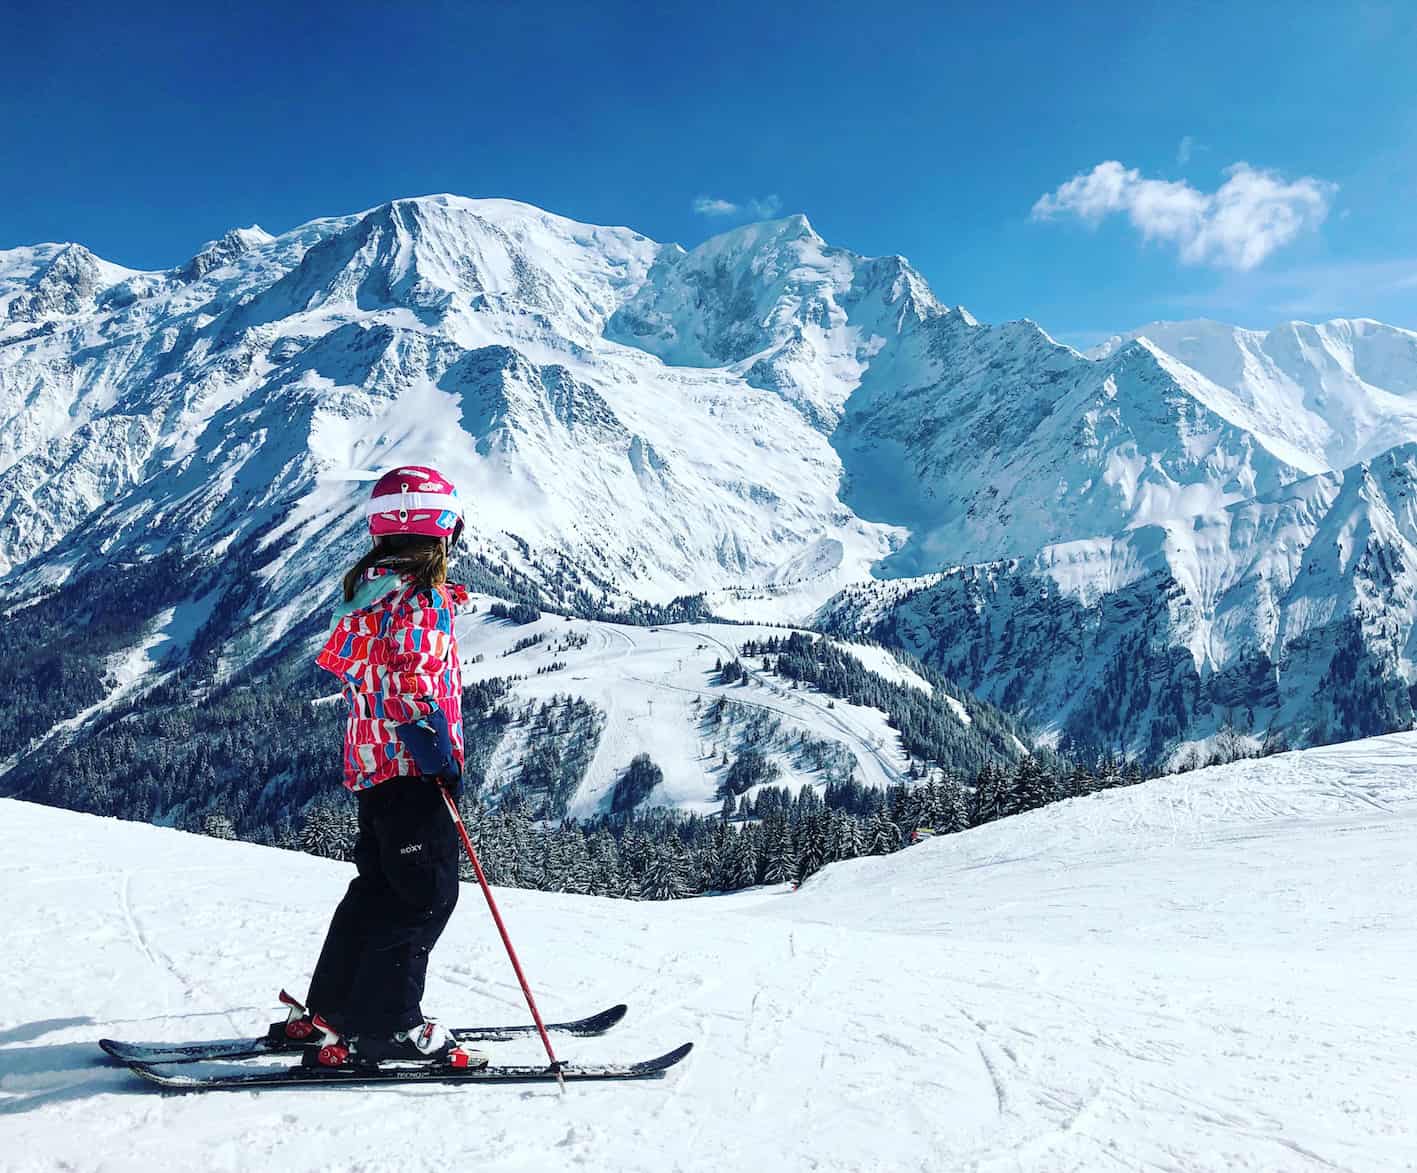 The Les Houches ski area in Chamonix valley offers fantastic family skiing ...